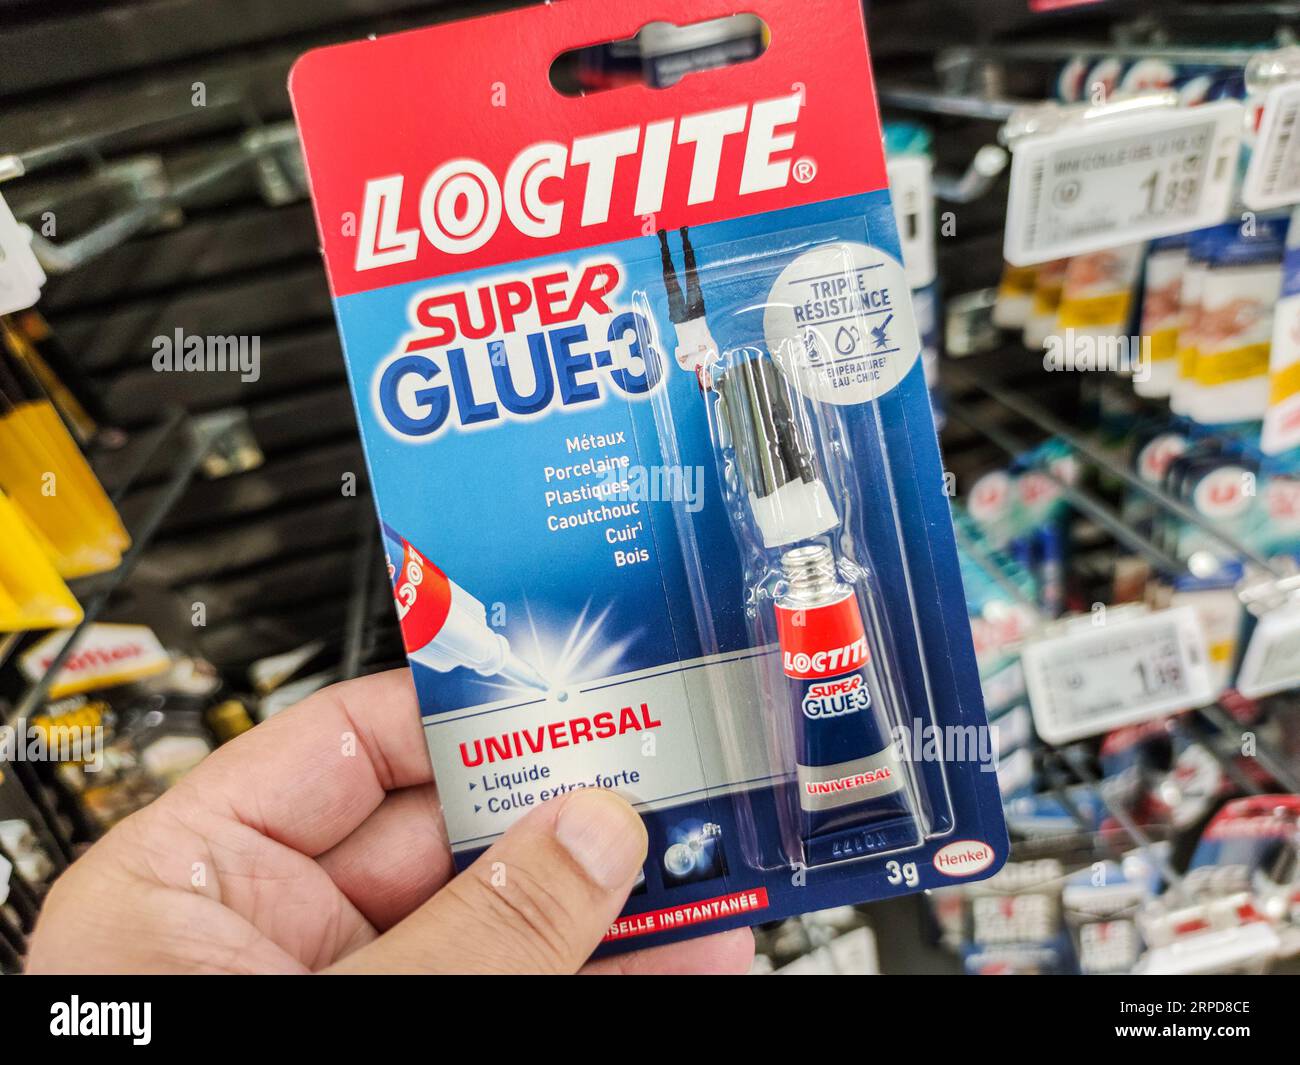 2 TUBES Super Glue 3 Loctite - Colle Extra-forte Universelle 2 x 3g